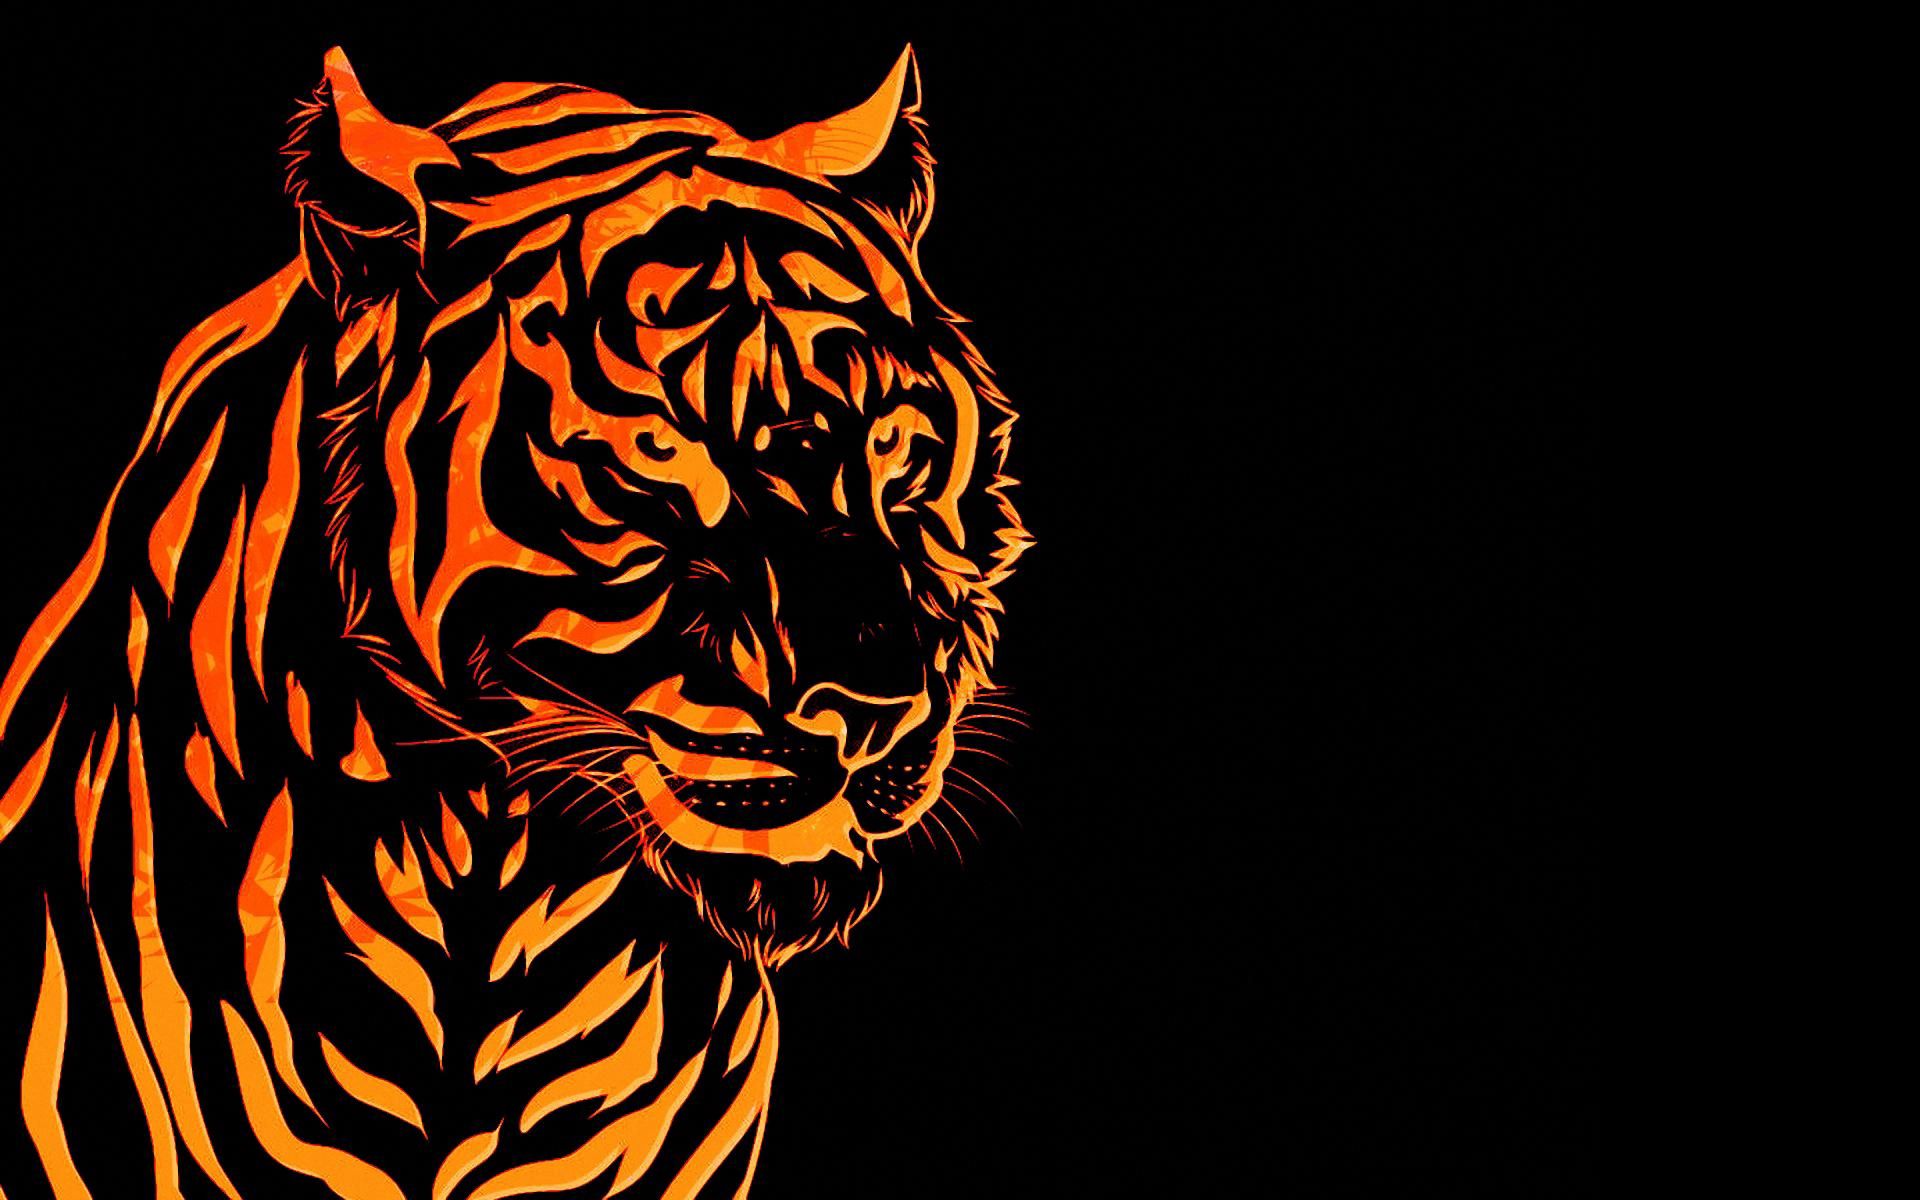 133611 Screensavers and Wallpapers Graphics for phone. Download vector, lines, tiger, graphics pictures for free